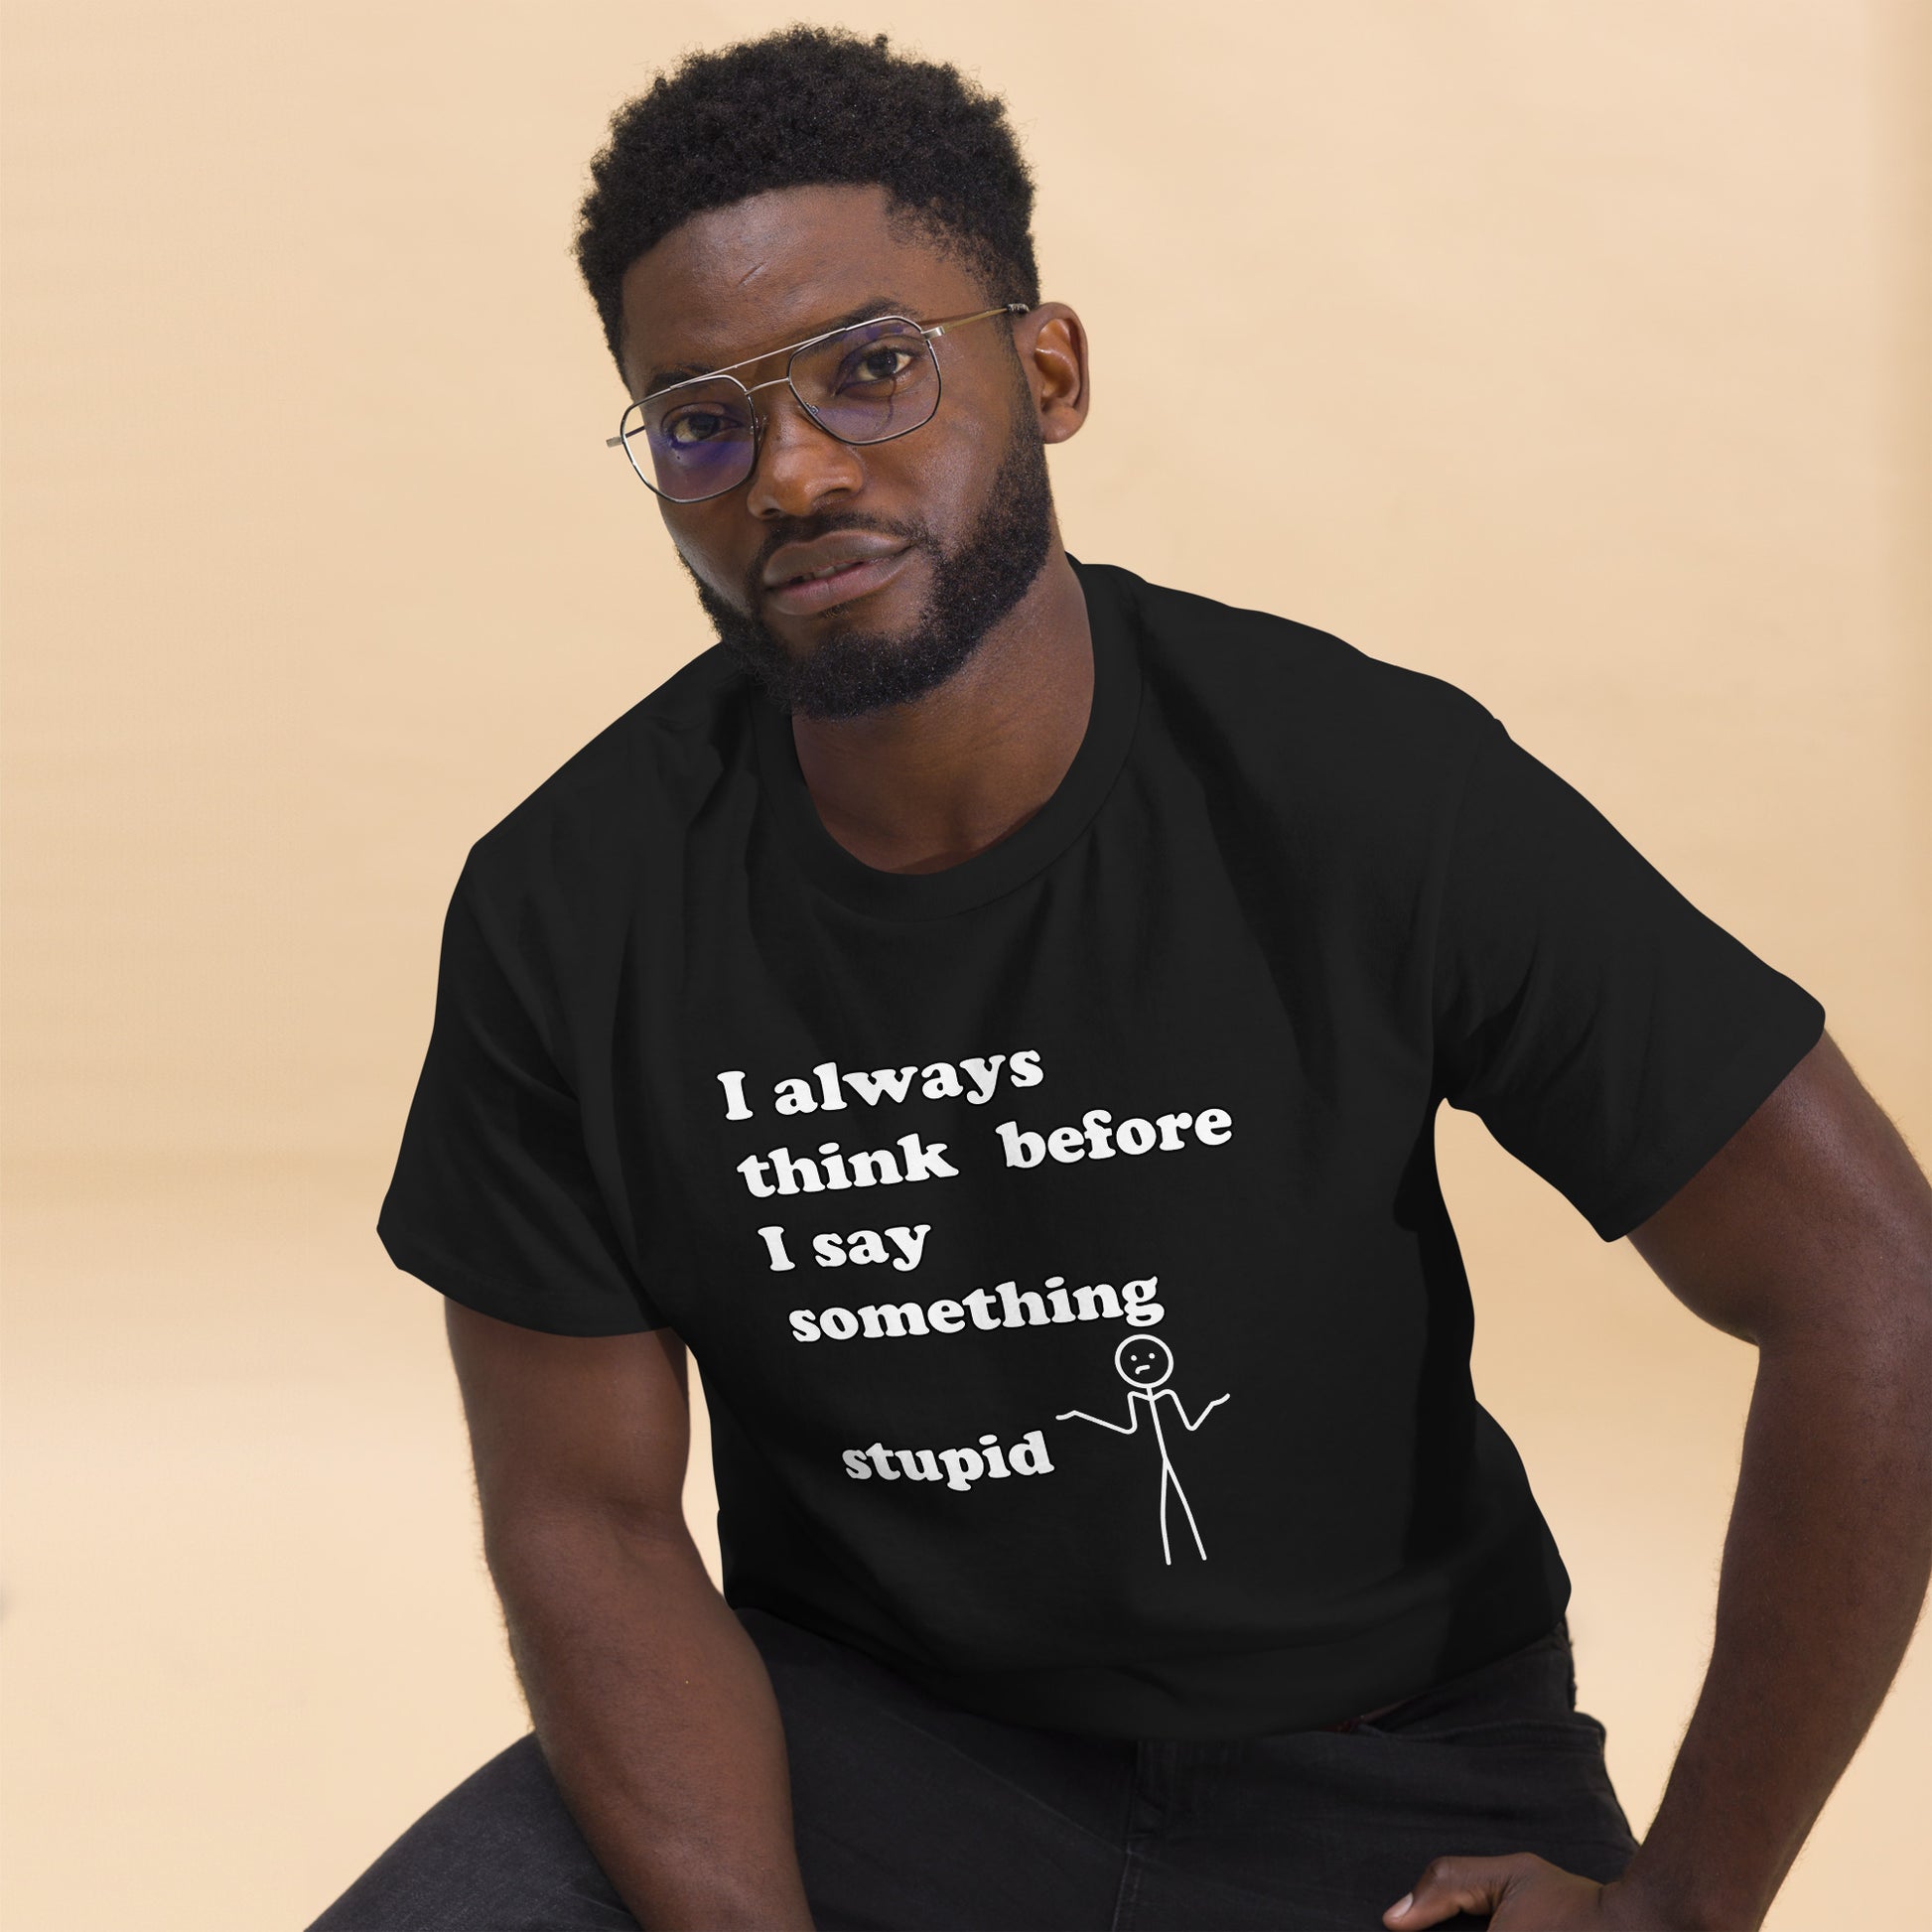 Man with black t-shirt with text "I always think before I say something stupid"